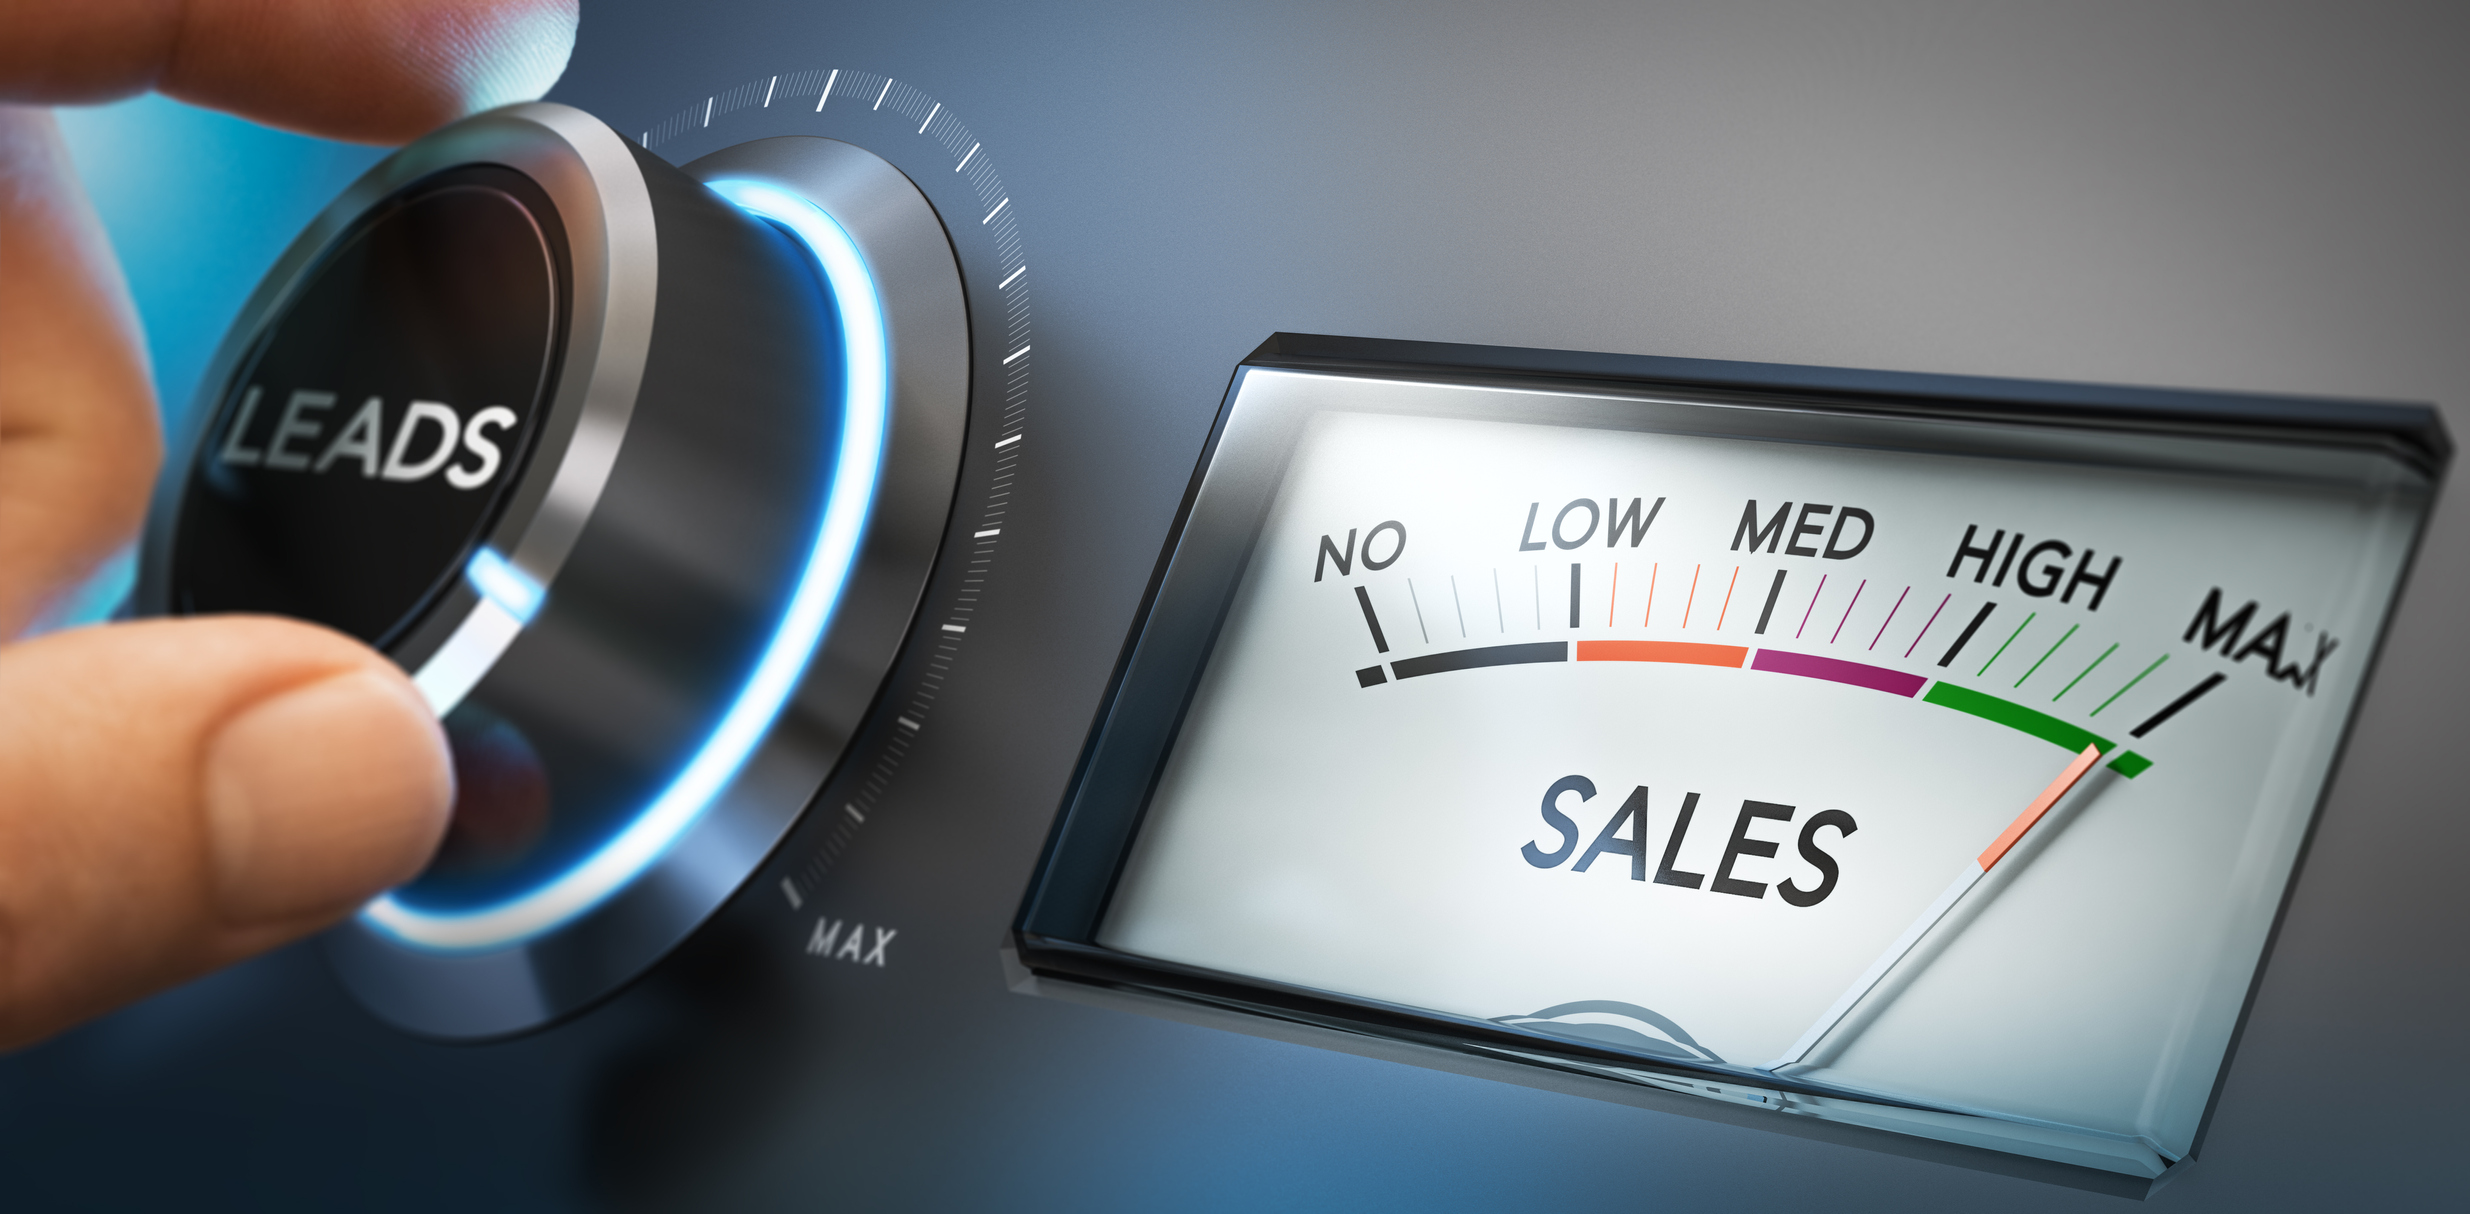 B2B Sales Leads 2020: Top 20 Ways to Generate More Sales Leads